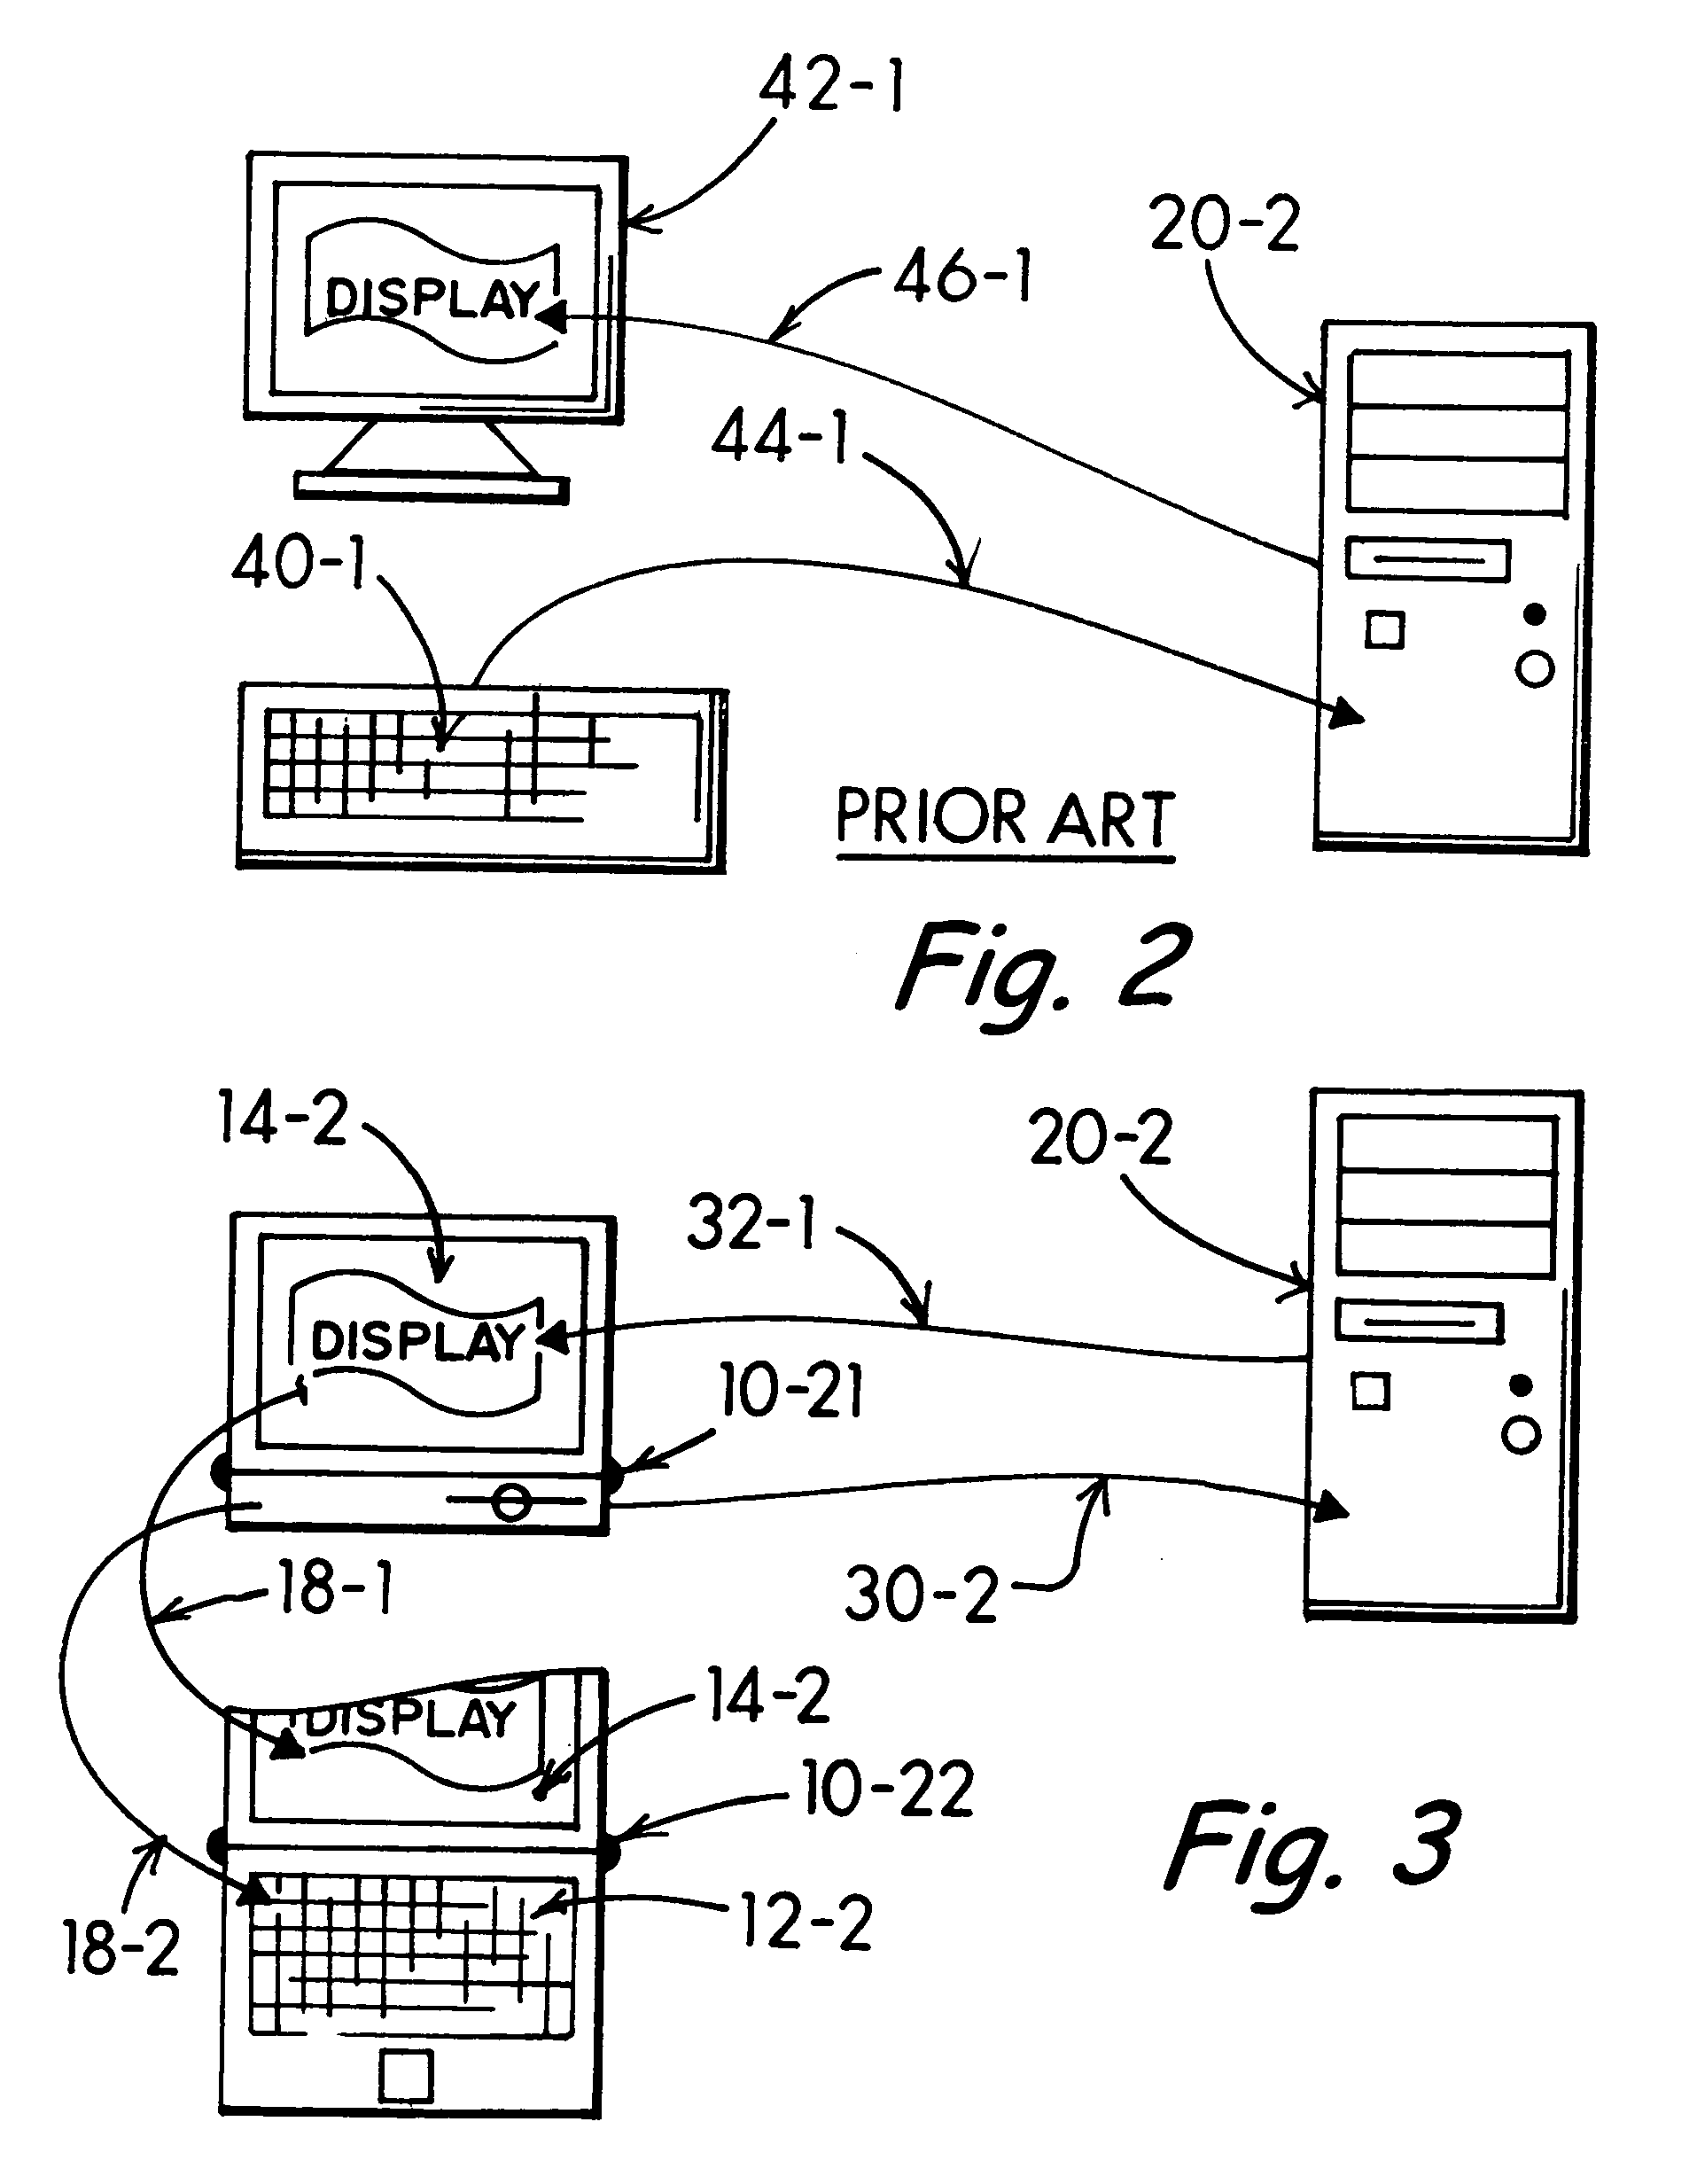 Unitized keyboard and display for desktop personal computer system